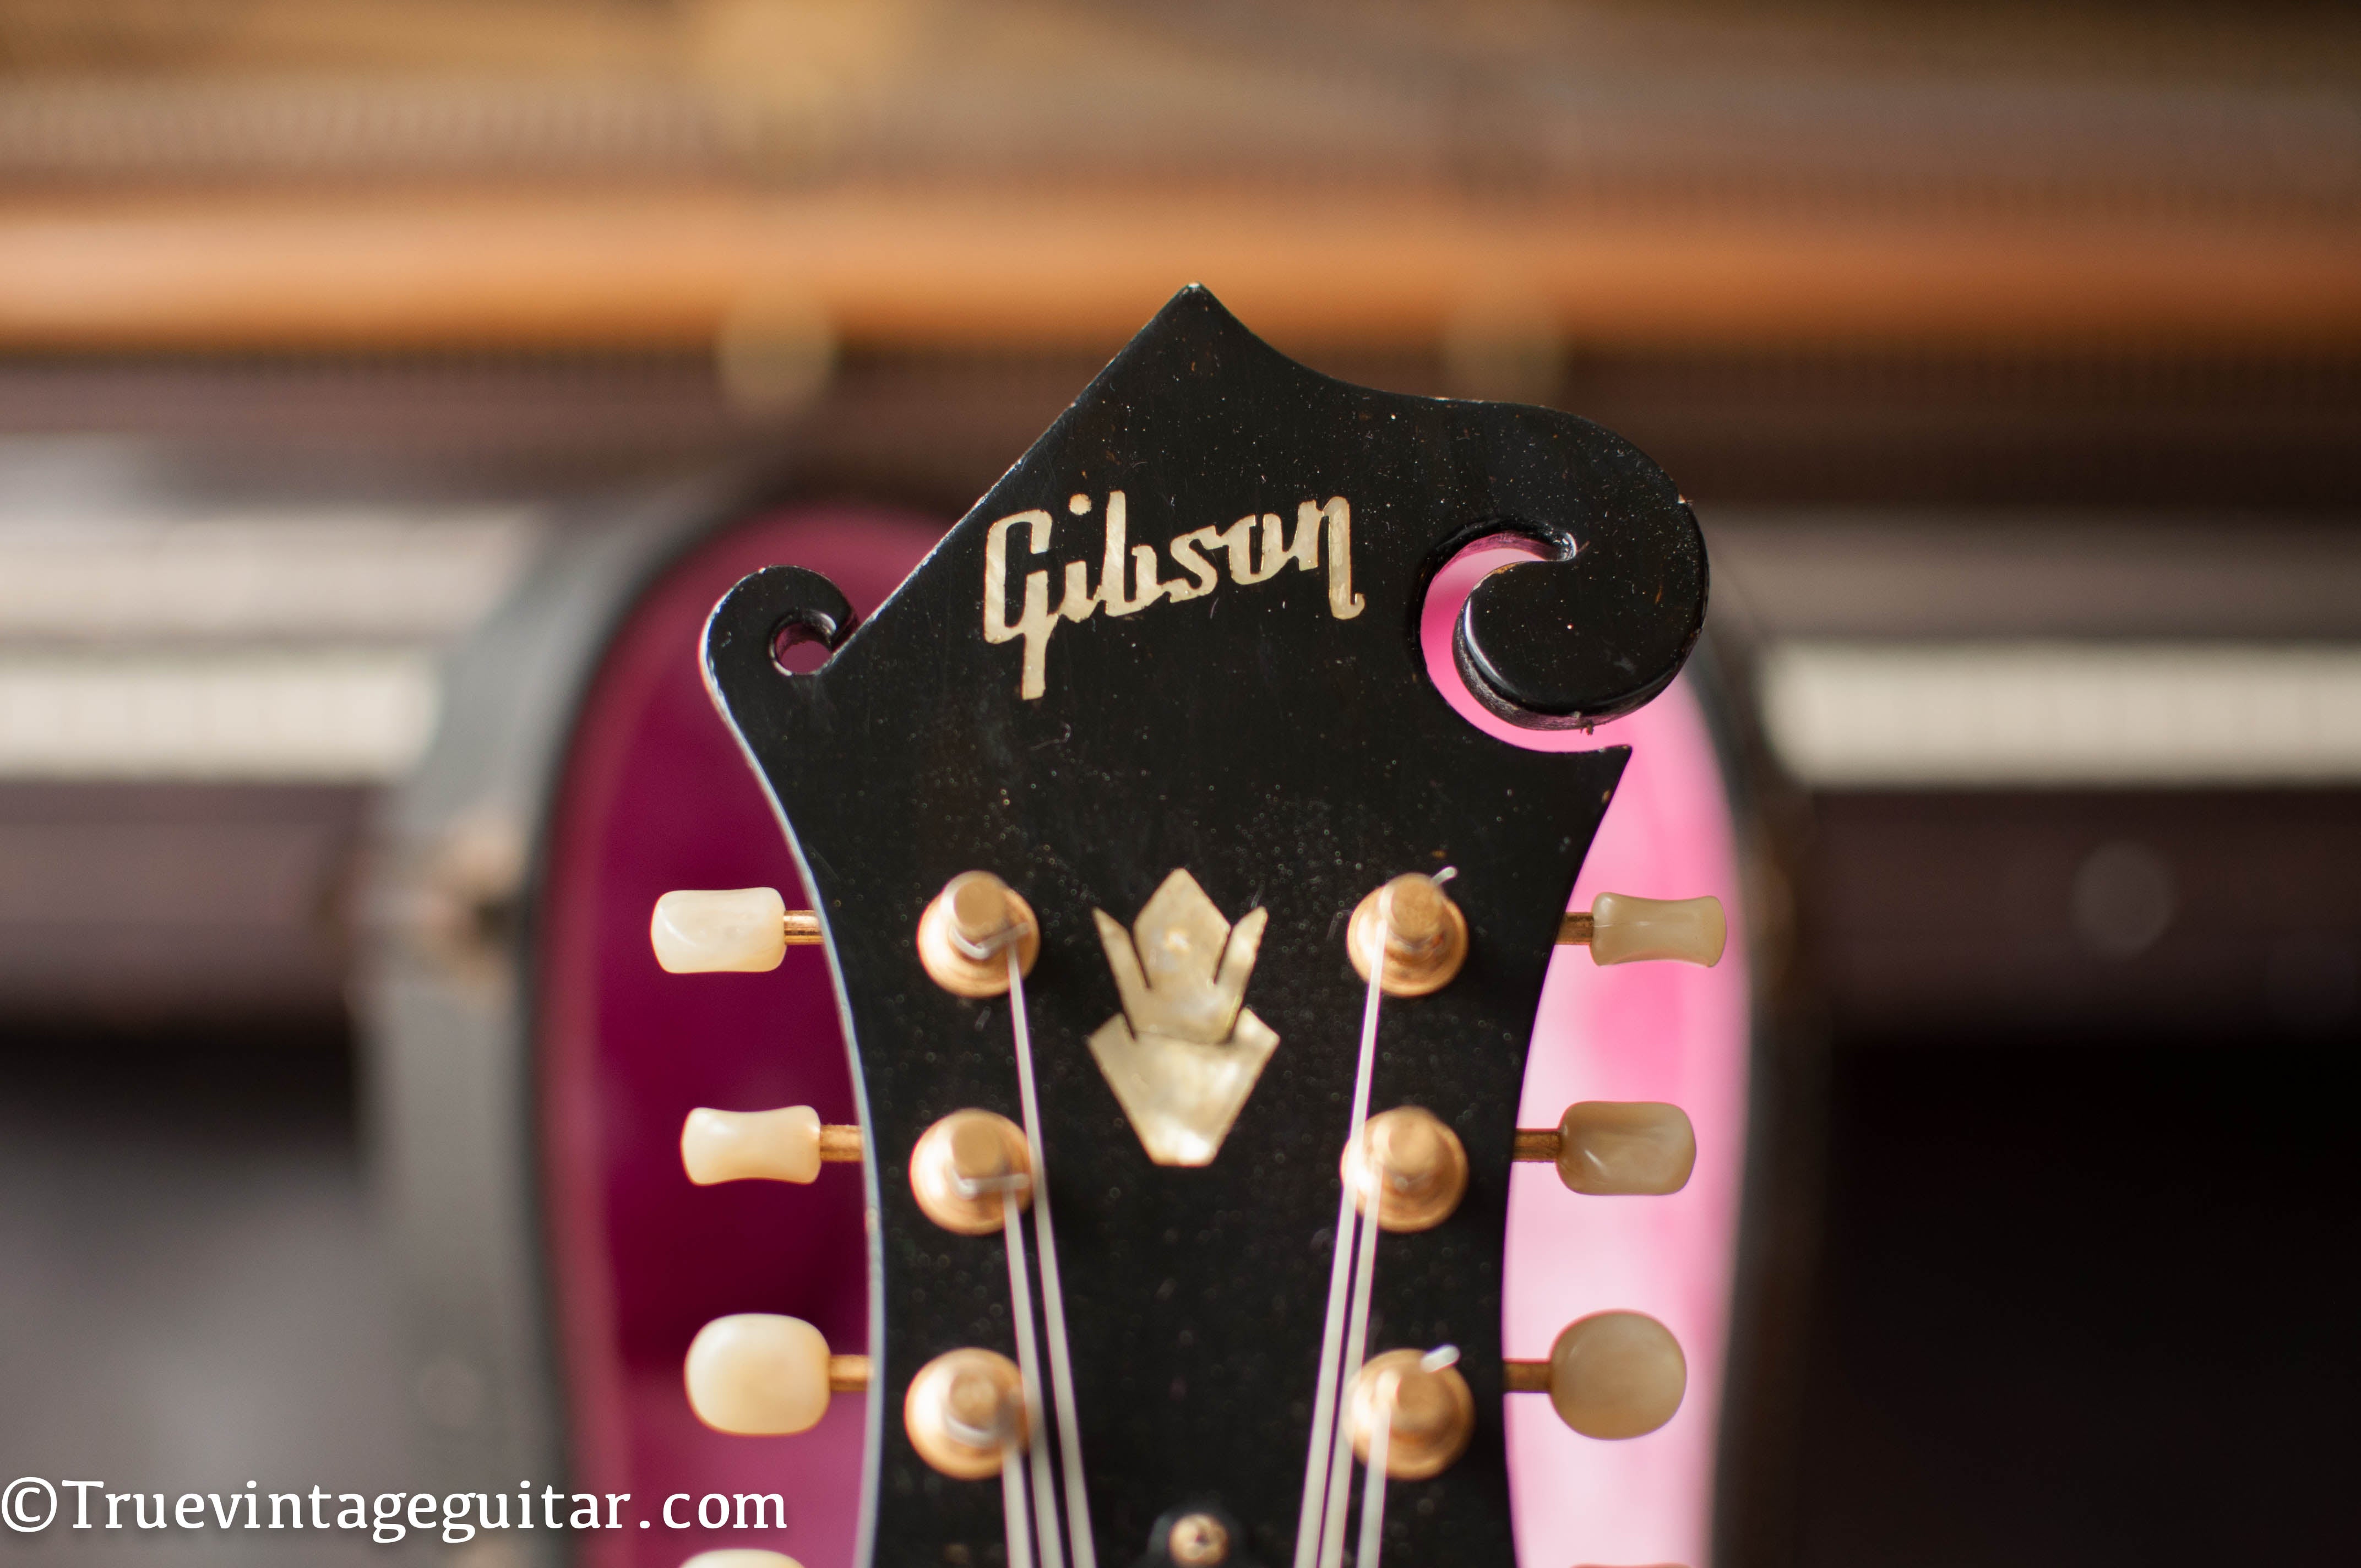 Gibson pearl inlaid headstock 1950s